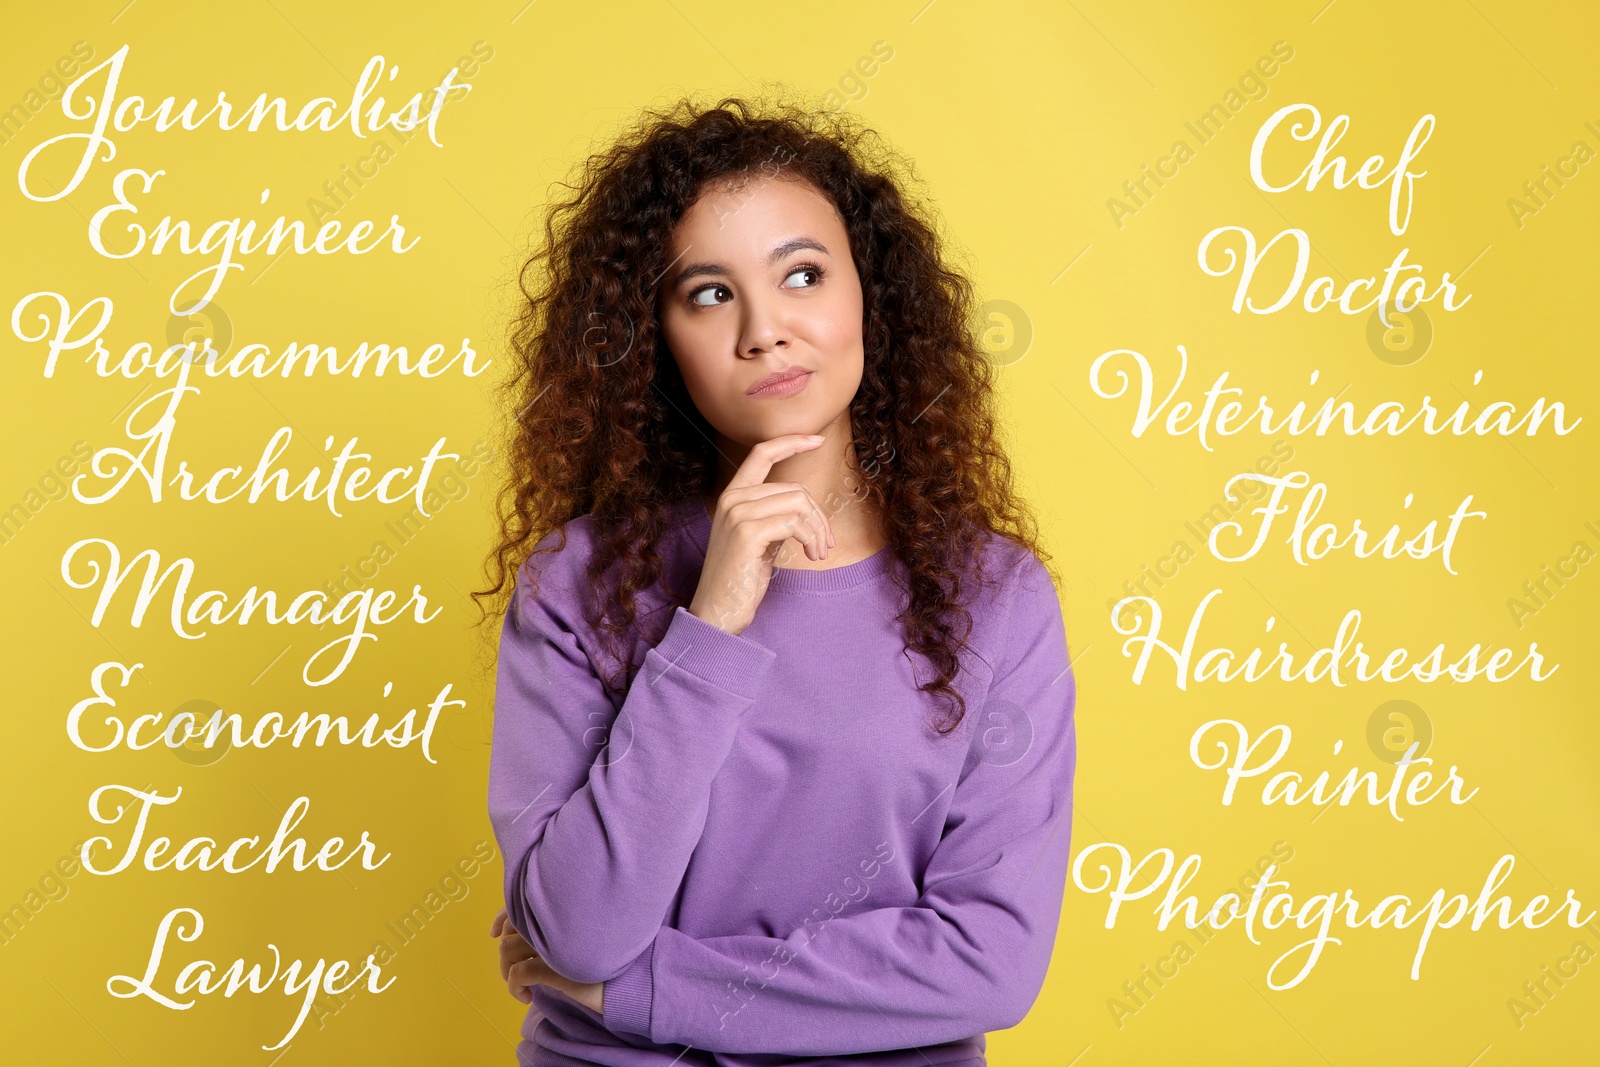 Image of Thoughtful African American woman choosing profession on yellow background